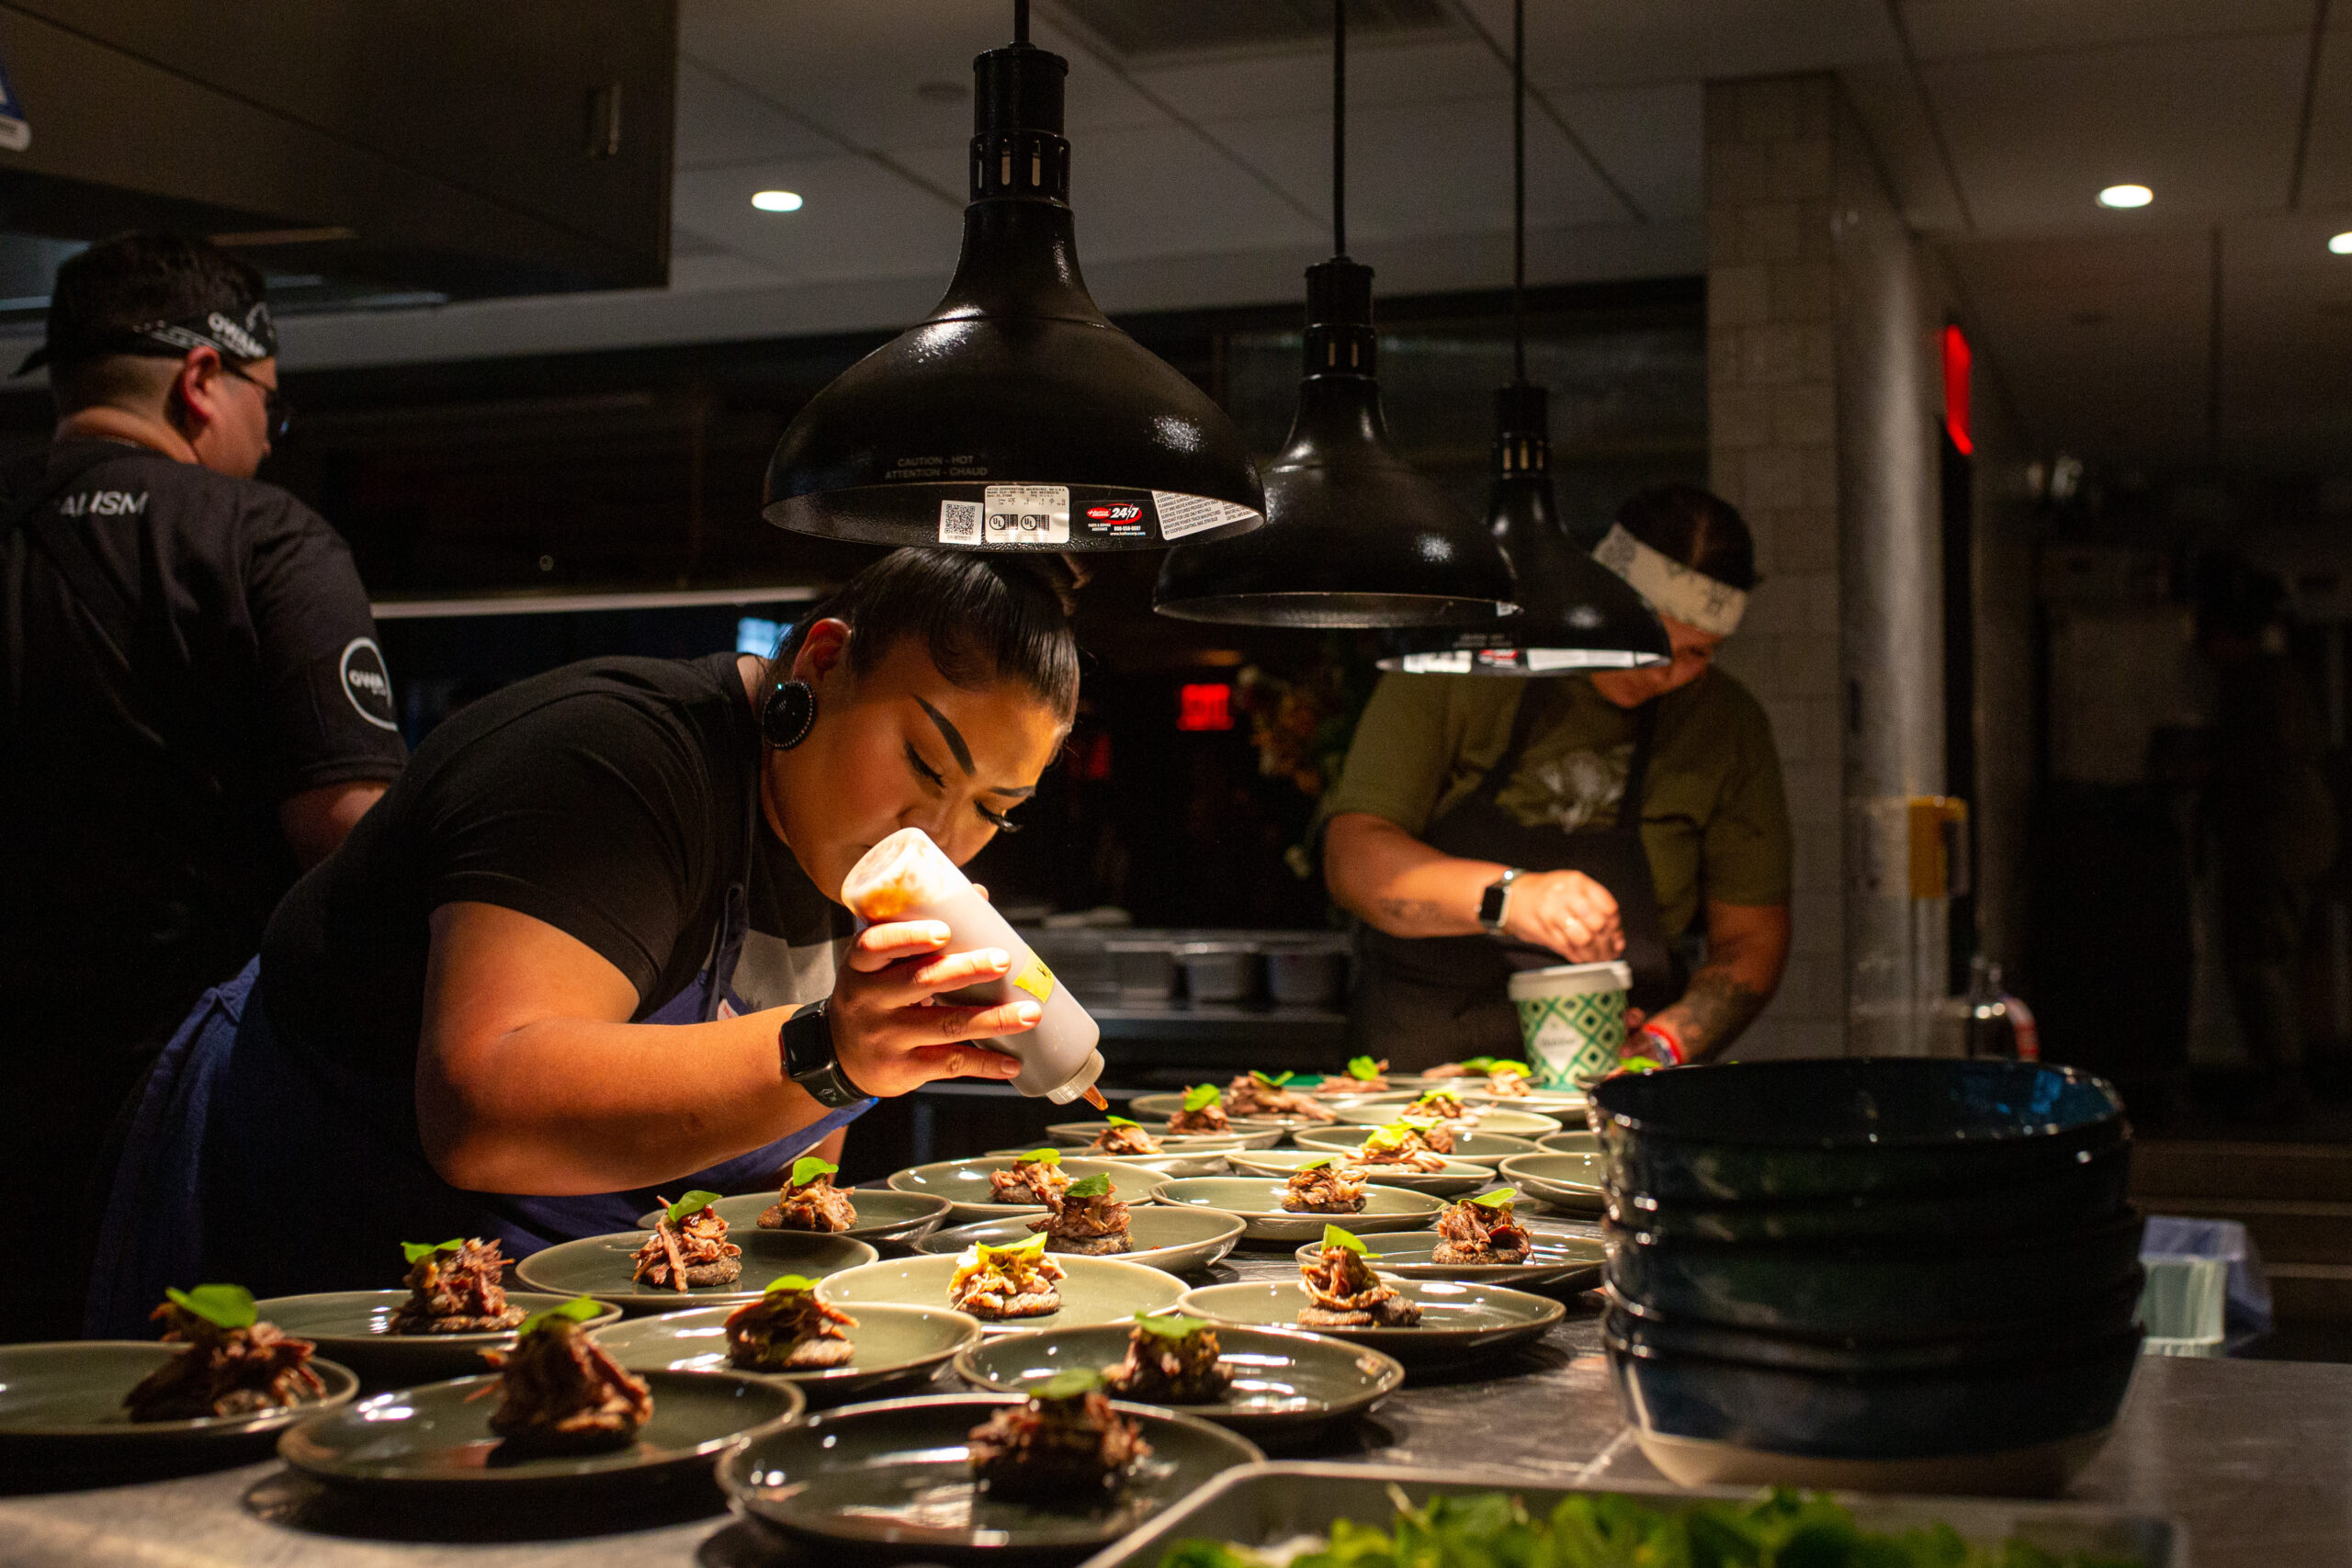 Chefs in a kitchen put the final touches on a row of dishes, all garnished with a leafy green.